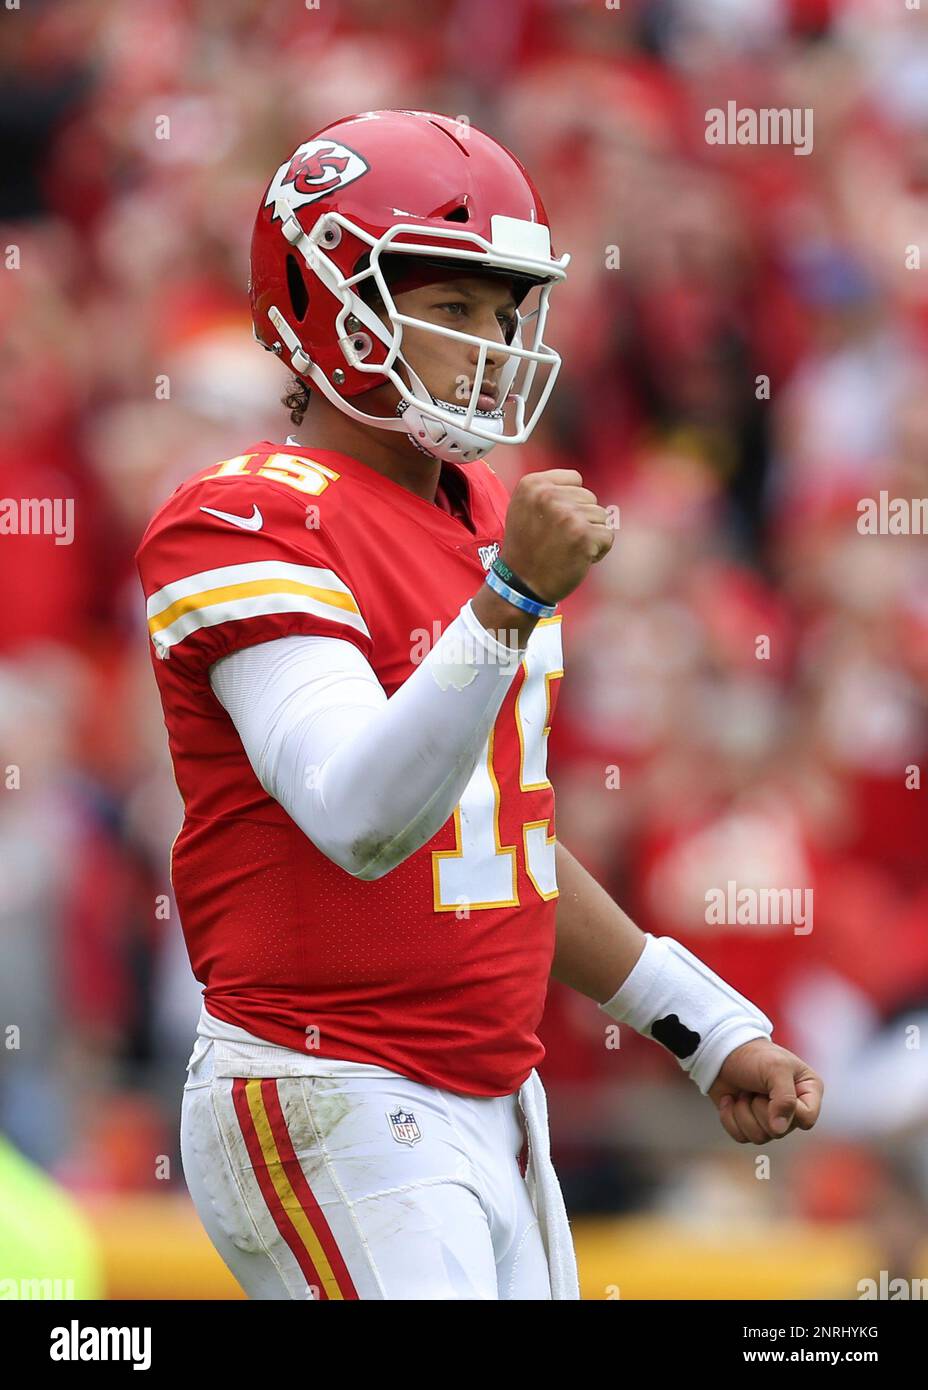 Kansas City Chiefs quarterback Patrick Mahomes leaves the stage following a  news conference following an NFL football game against the Baltimore Ravens  in Kansas City, Mo., Sunday, Sept. 22, 2019. The Kansas